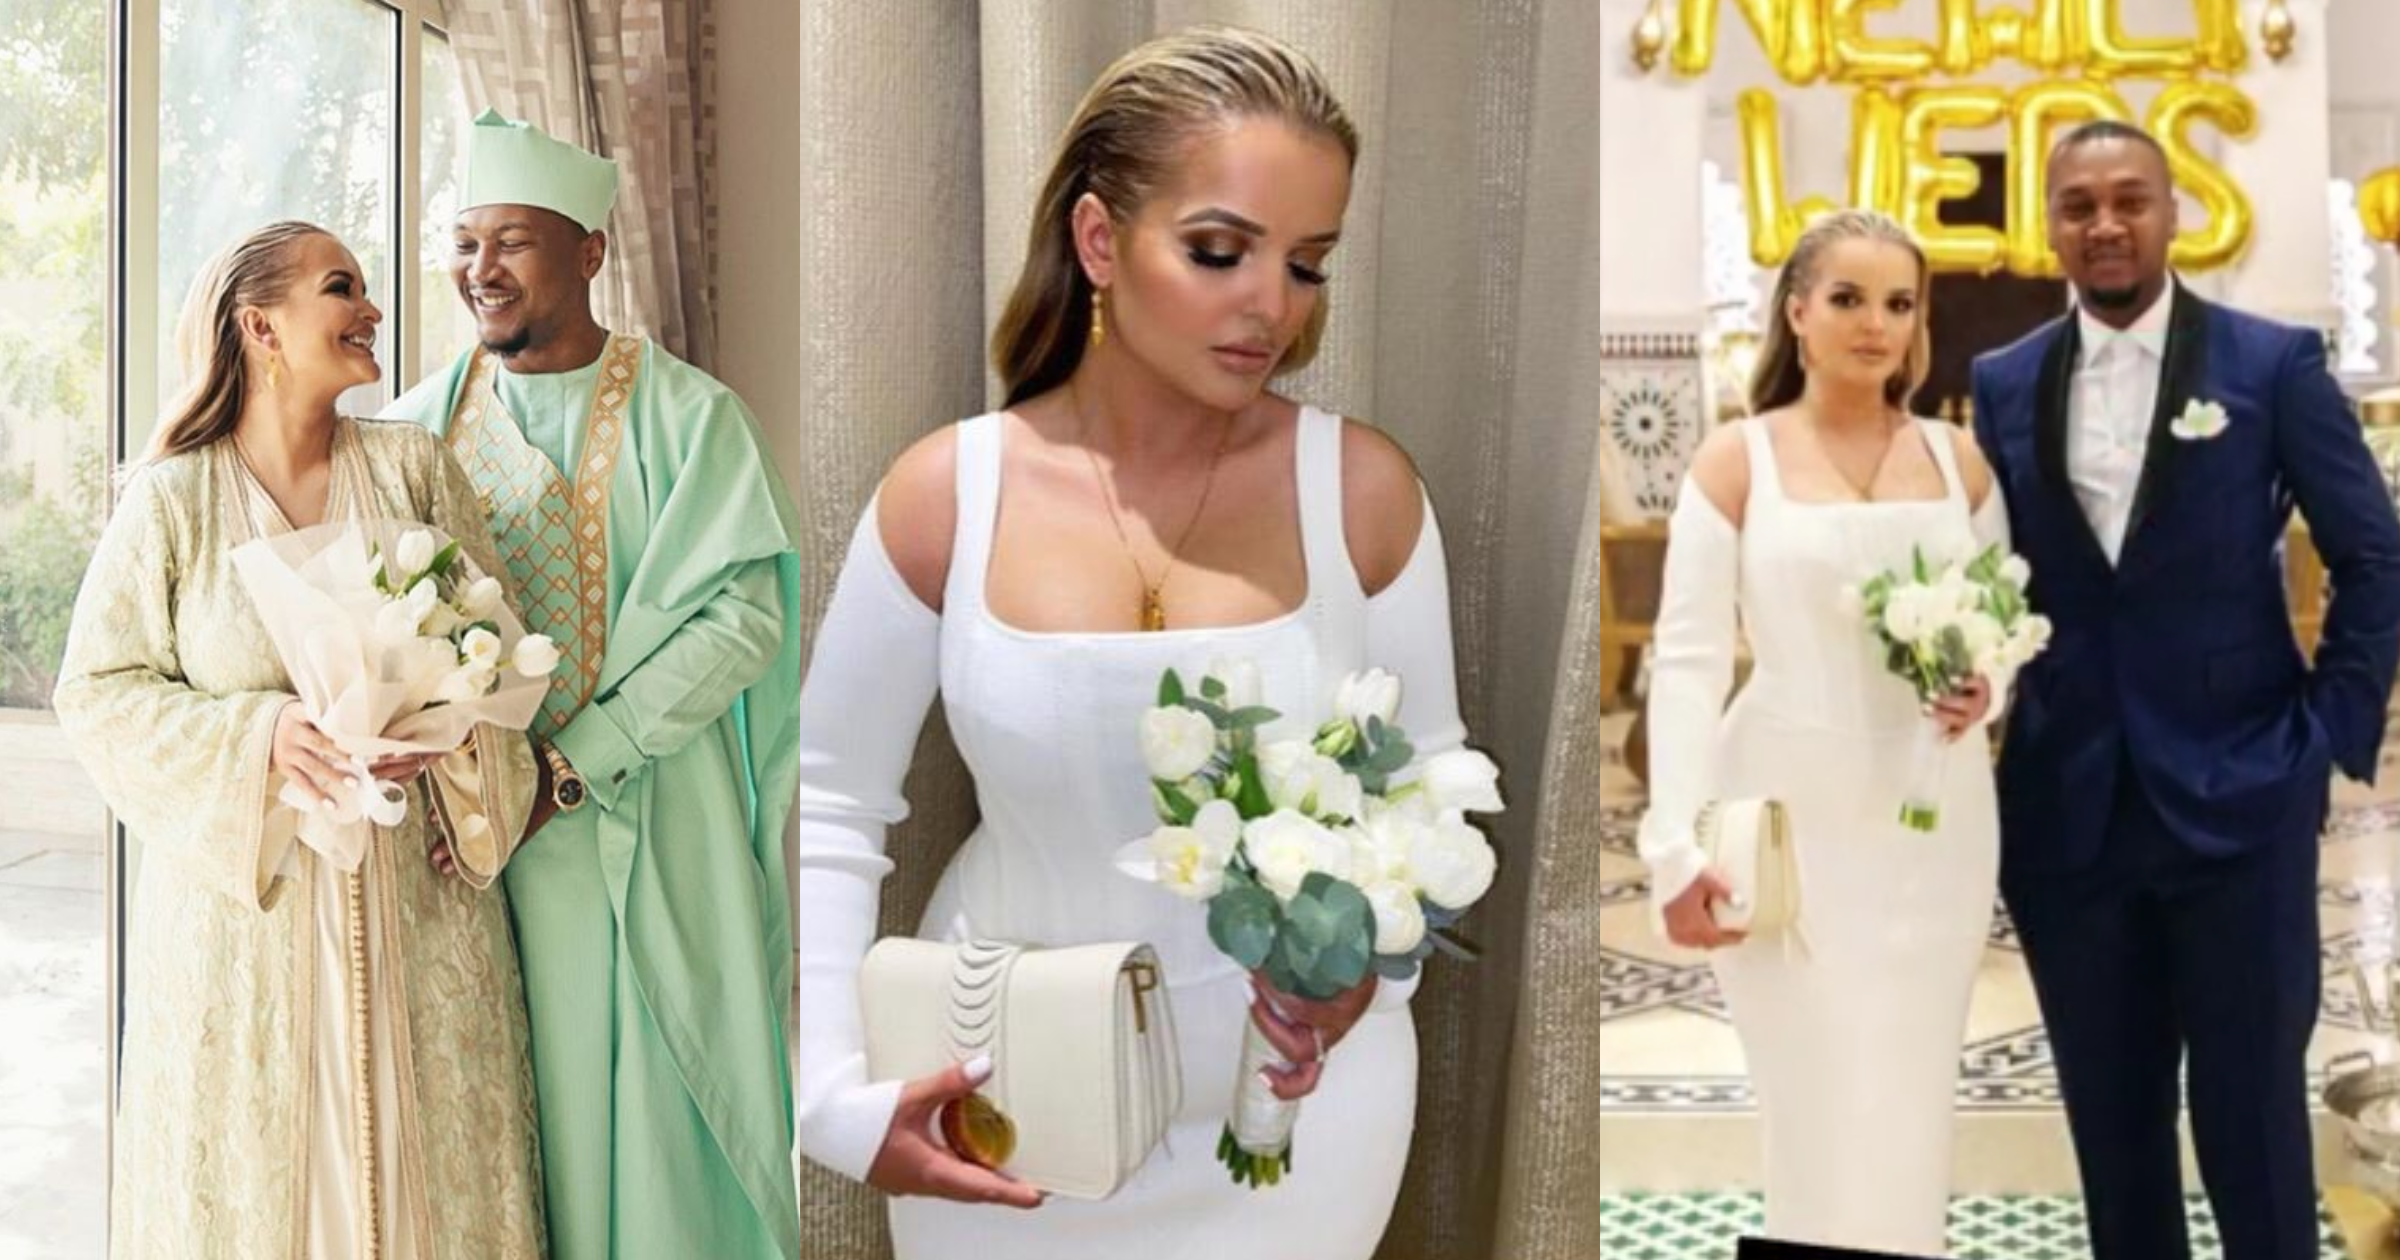 Shafik Mahama: More photos and videos from the wedding of ex-president's son